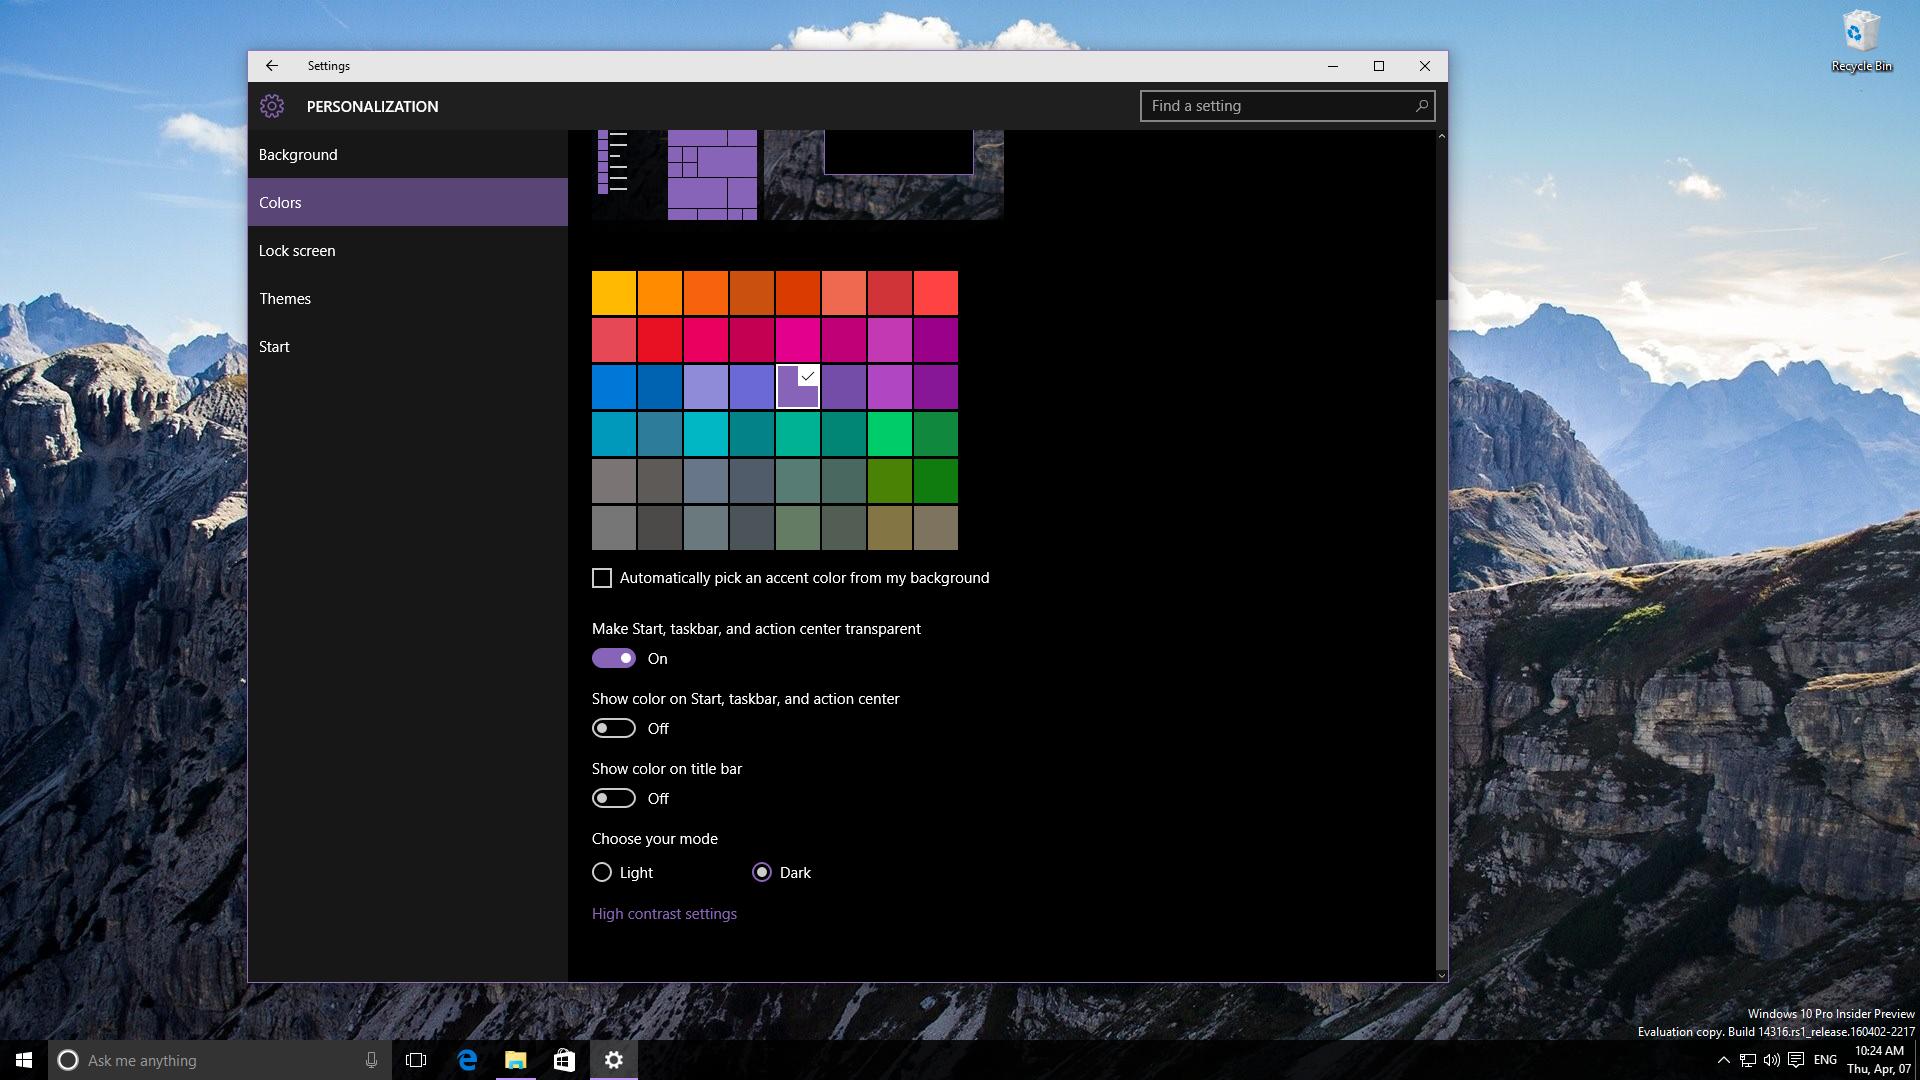 How to make your own themes in windows 10 - televisionklo